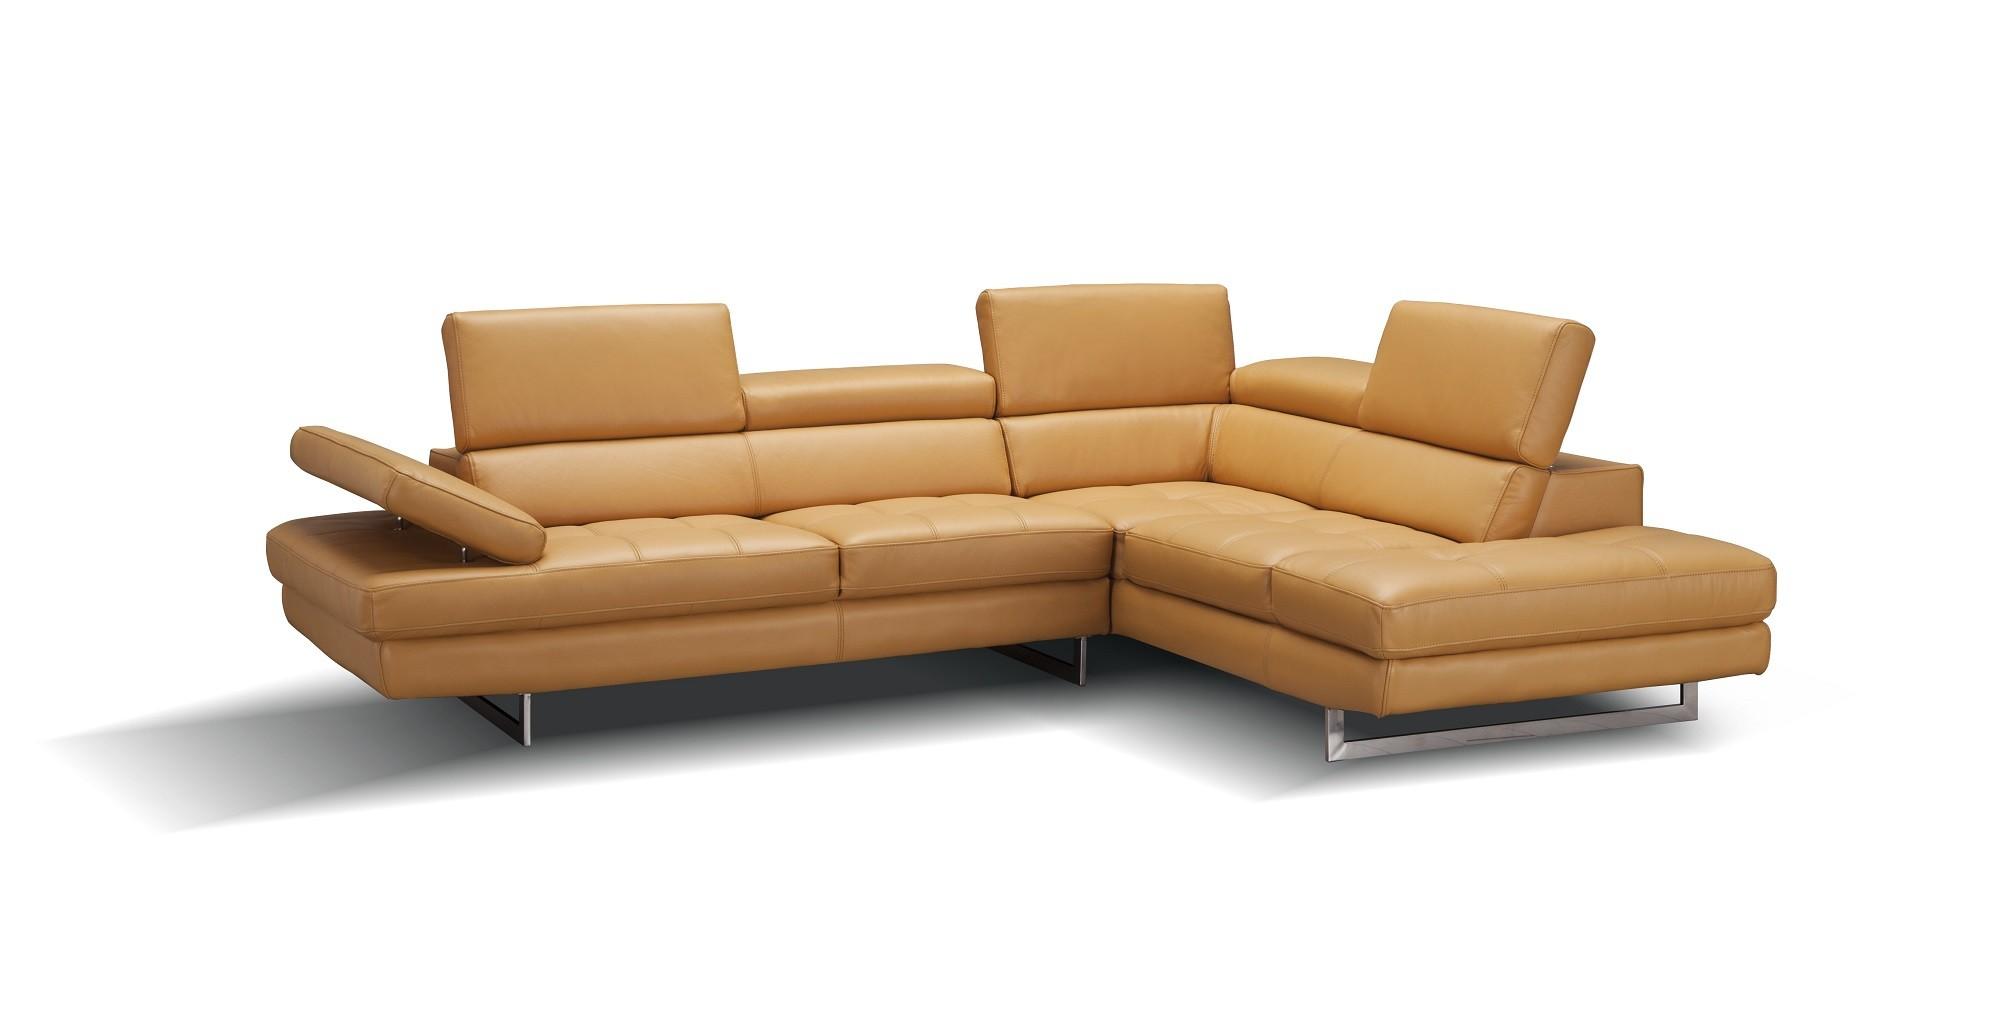 Contemporary Sectional Sofa A761 SKU 178555 in Yellow Italian Leather